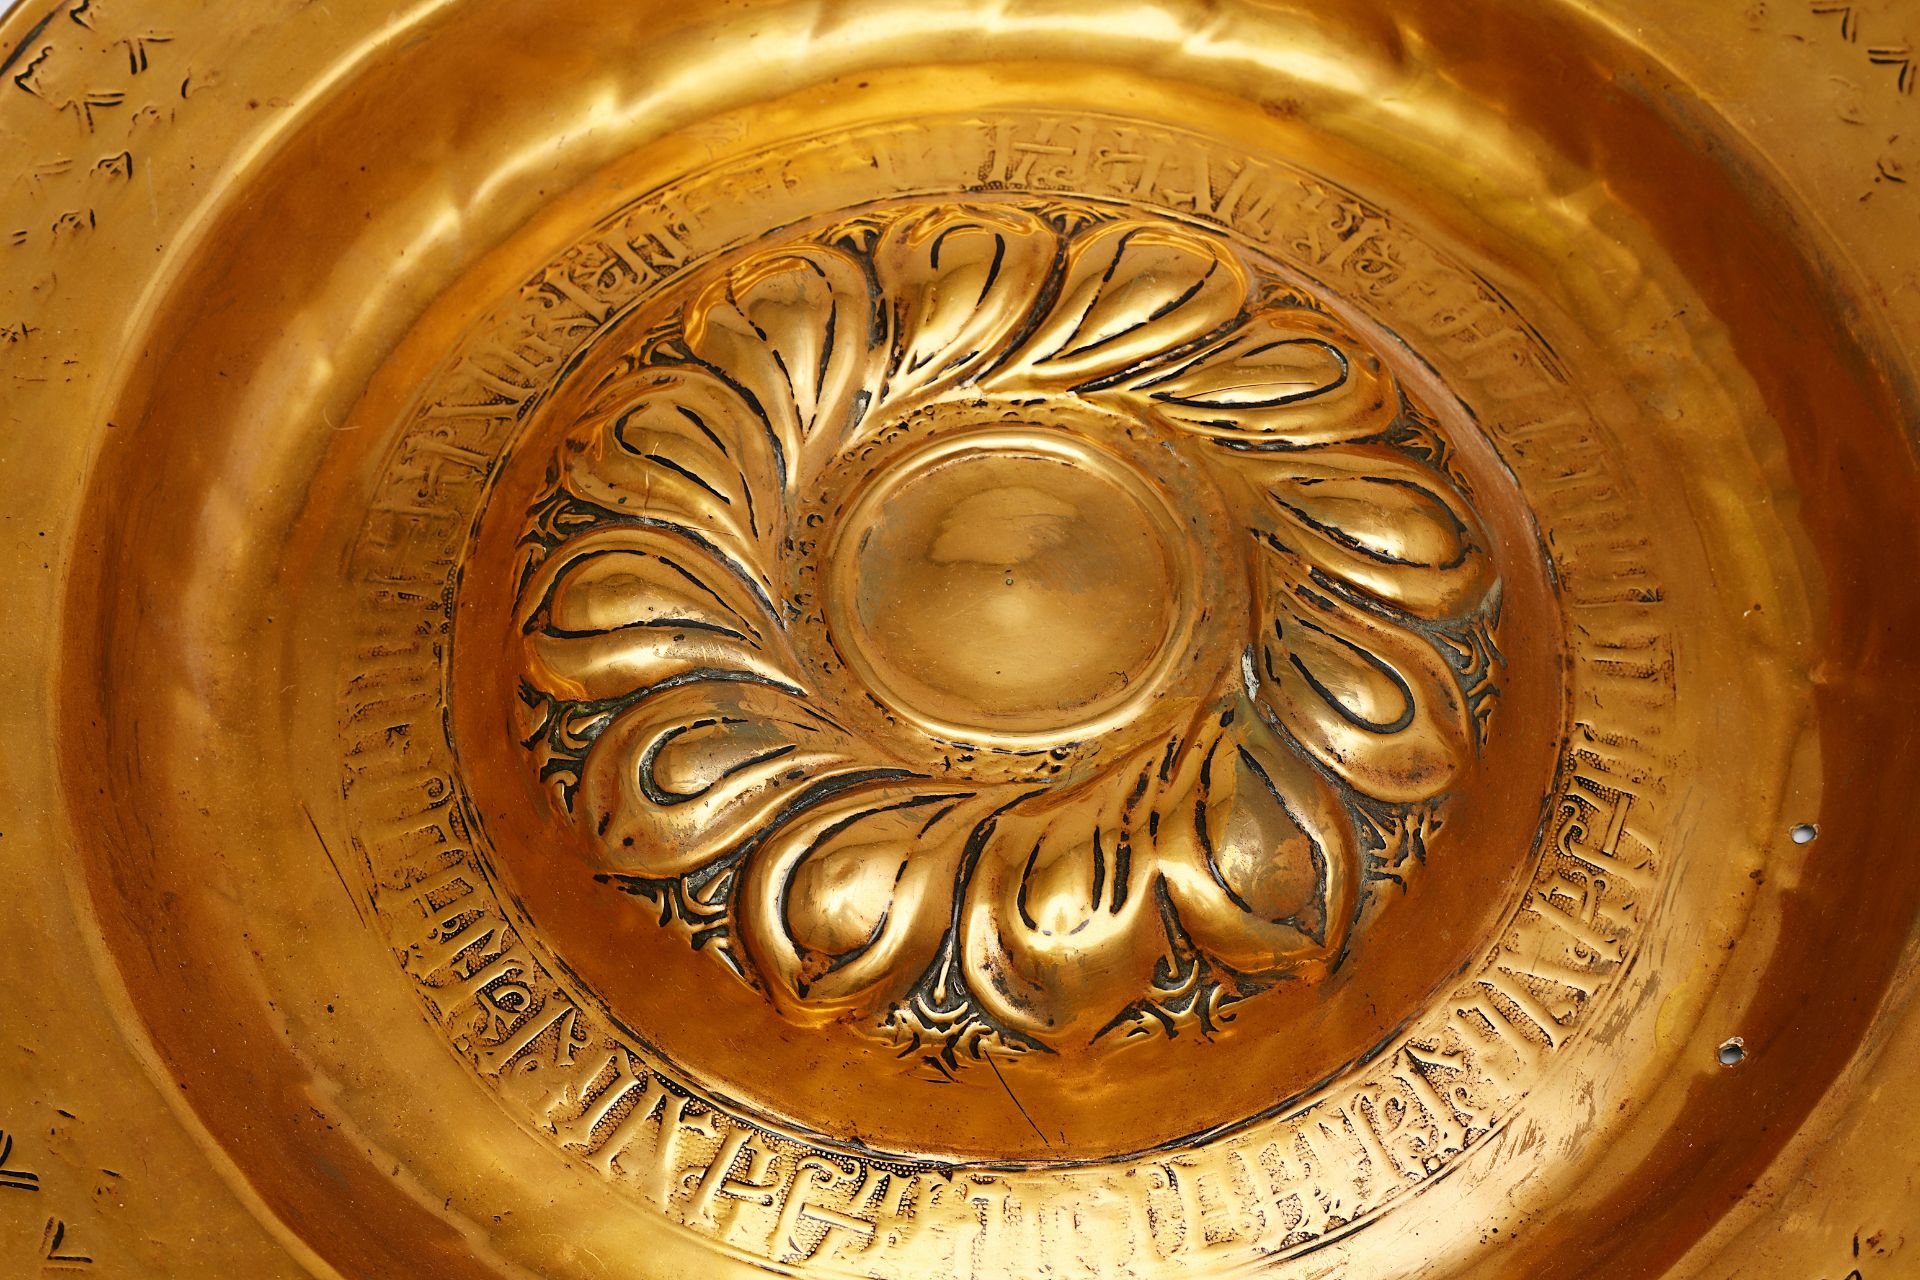 A large brass alms dish, probably Nuremberg, Germany, 16th/17th C. - Image 4 of 4